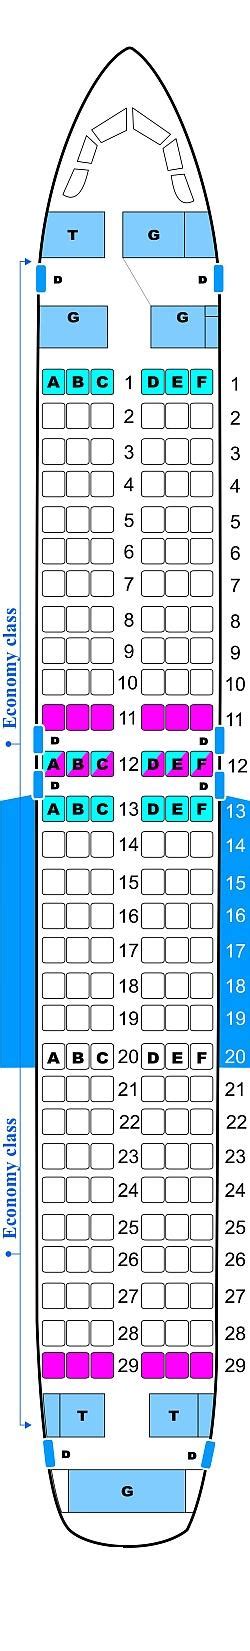 United Airlines Seat Map Airbus A320 My Bios